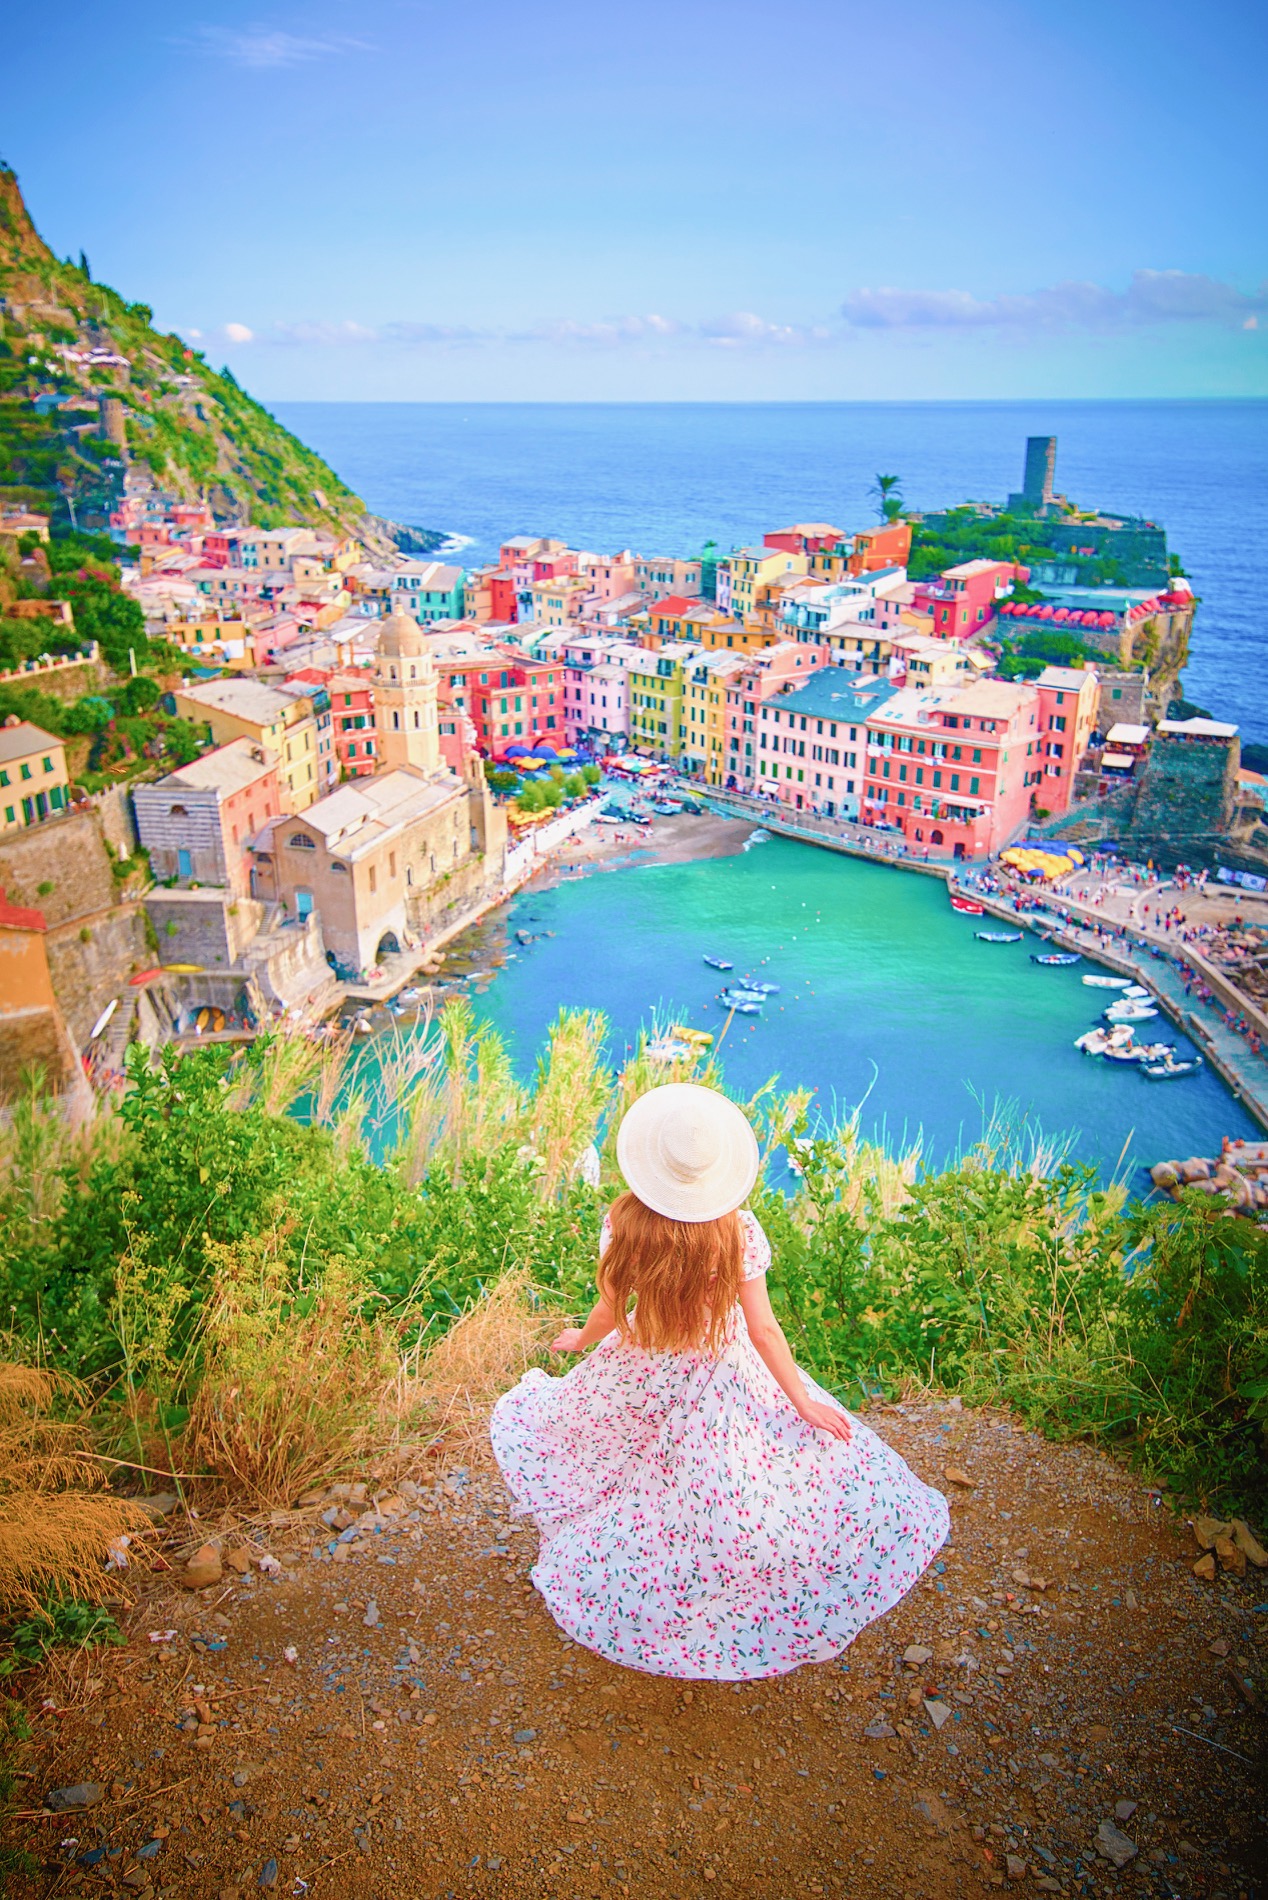 Woman in a floral dress looks out over the colorful town of Vernazza and its harbor.